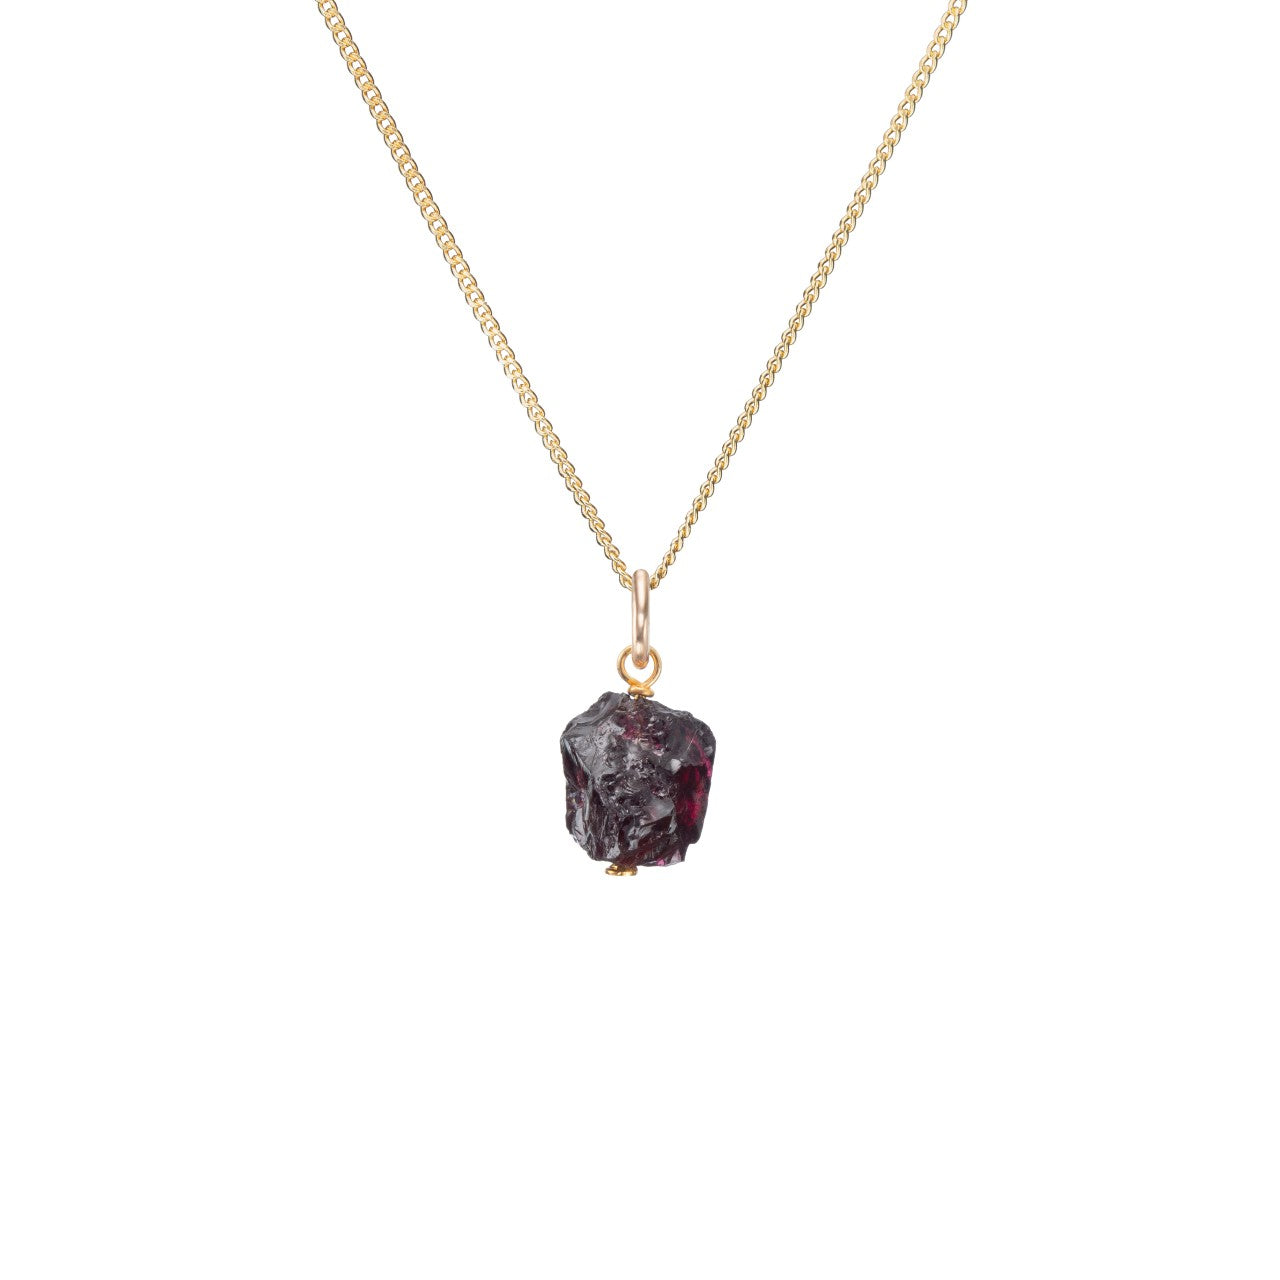 Rosecliff Small Circle Garnet Necklace in 14k Gold (January)